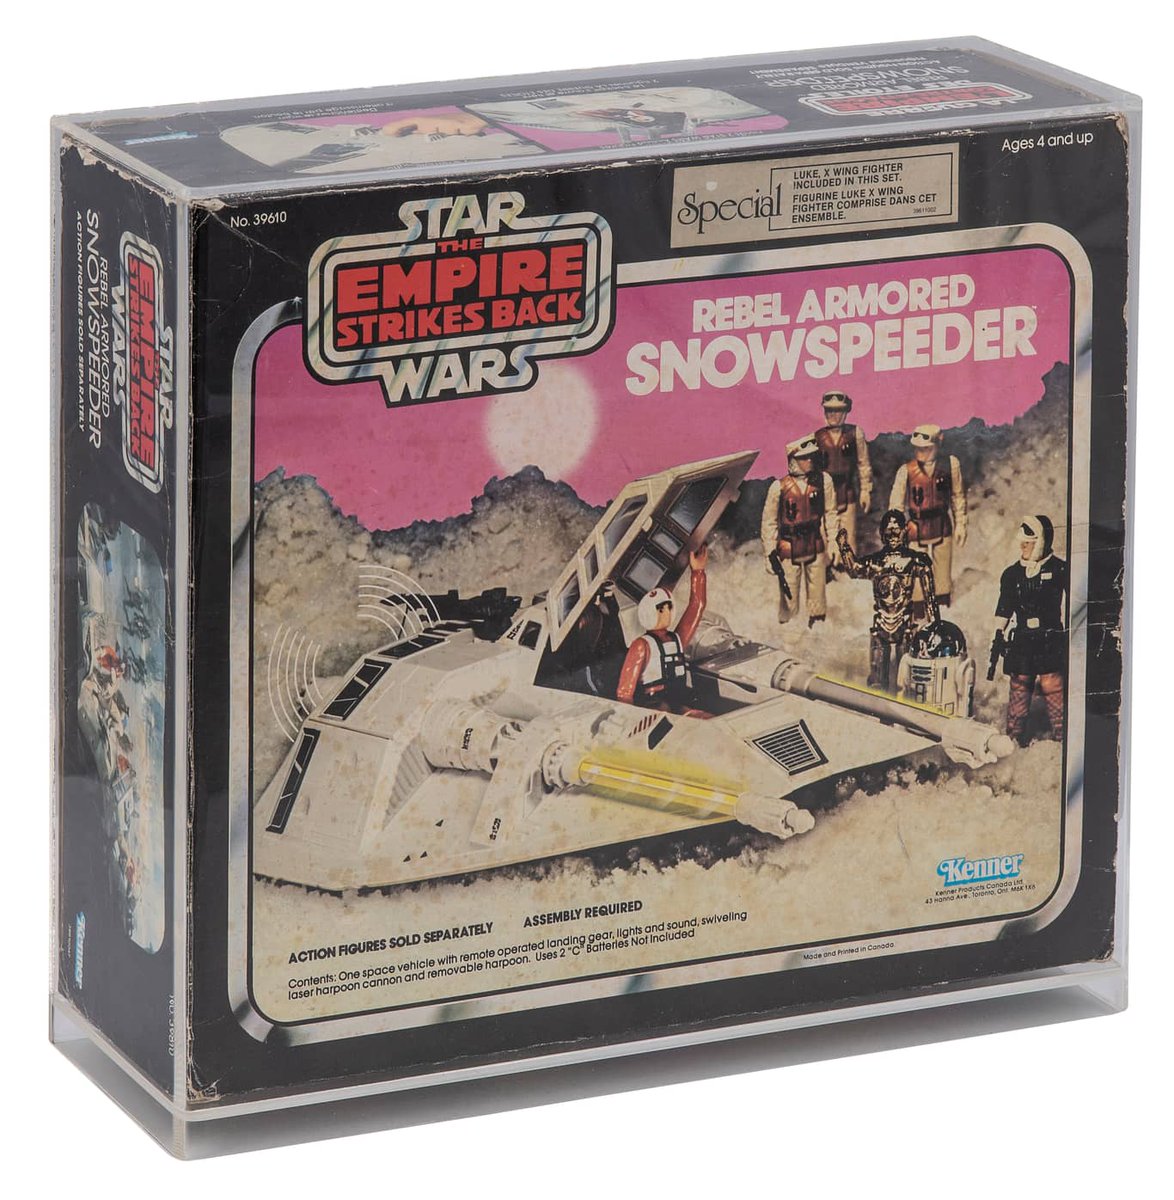 The Battle of Hoth ❄️ This 1980 Kenner Star Wars: The Empire Strikes Back Rebel Armored Snowspeeder Luke X-Wing Special Offer Box - BOX ONLY is available now in our May Pop Culture Elite Auction: bit.ly/3USme8z